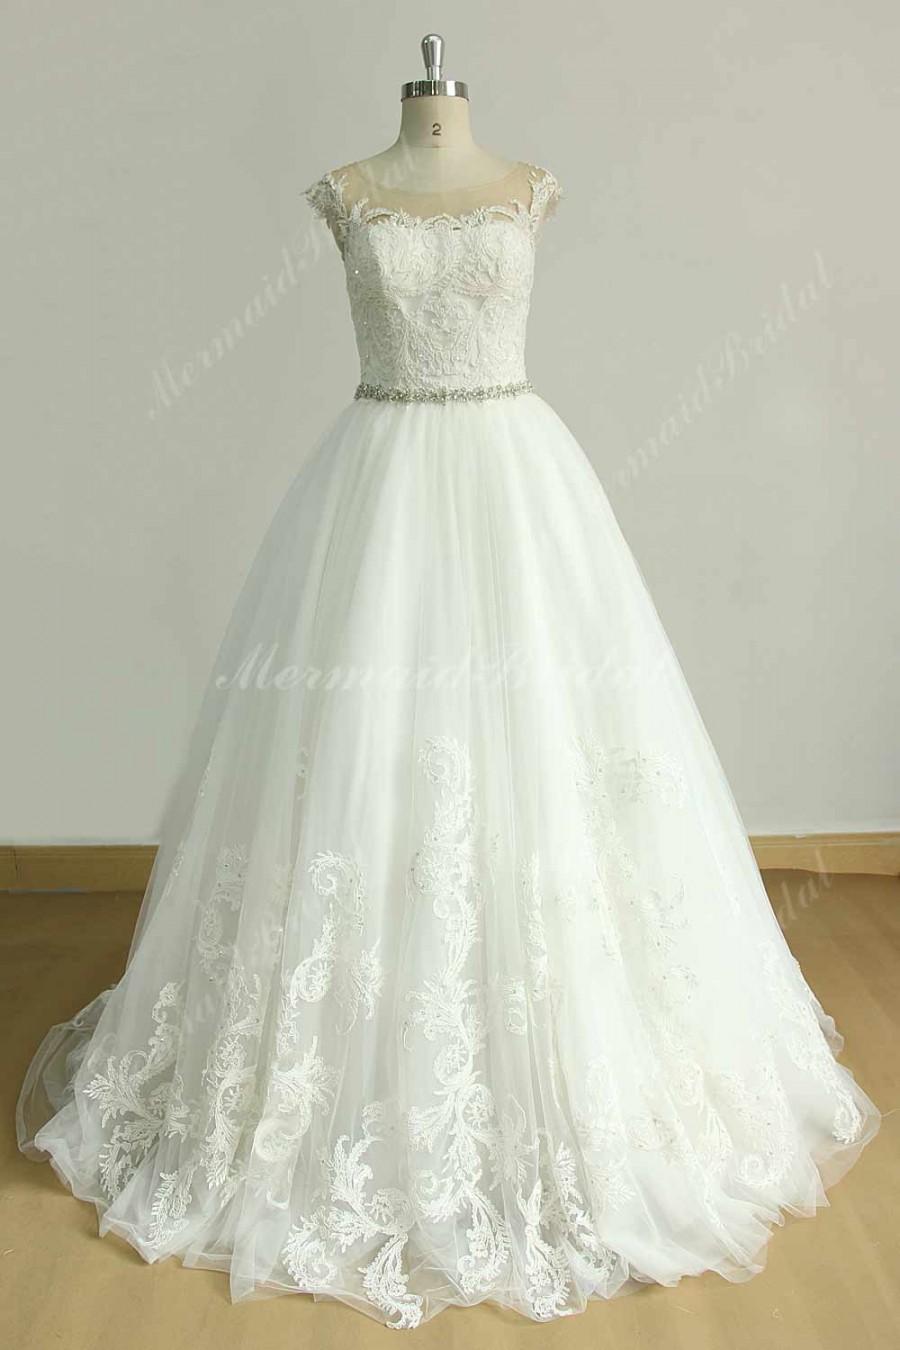 Mariage - Very ELegant tulle lace A line wedding dress with rhinestone beading sash and lace capsleeves